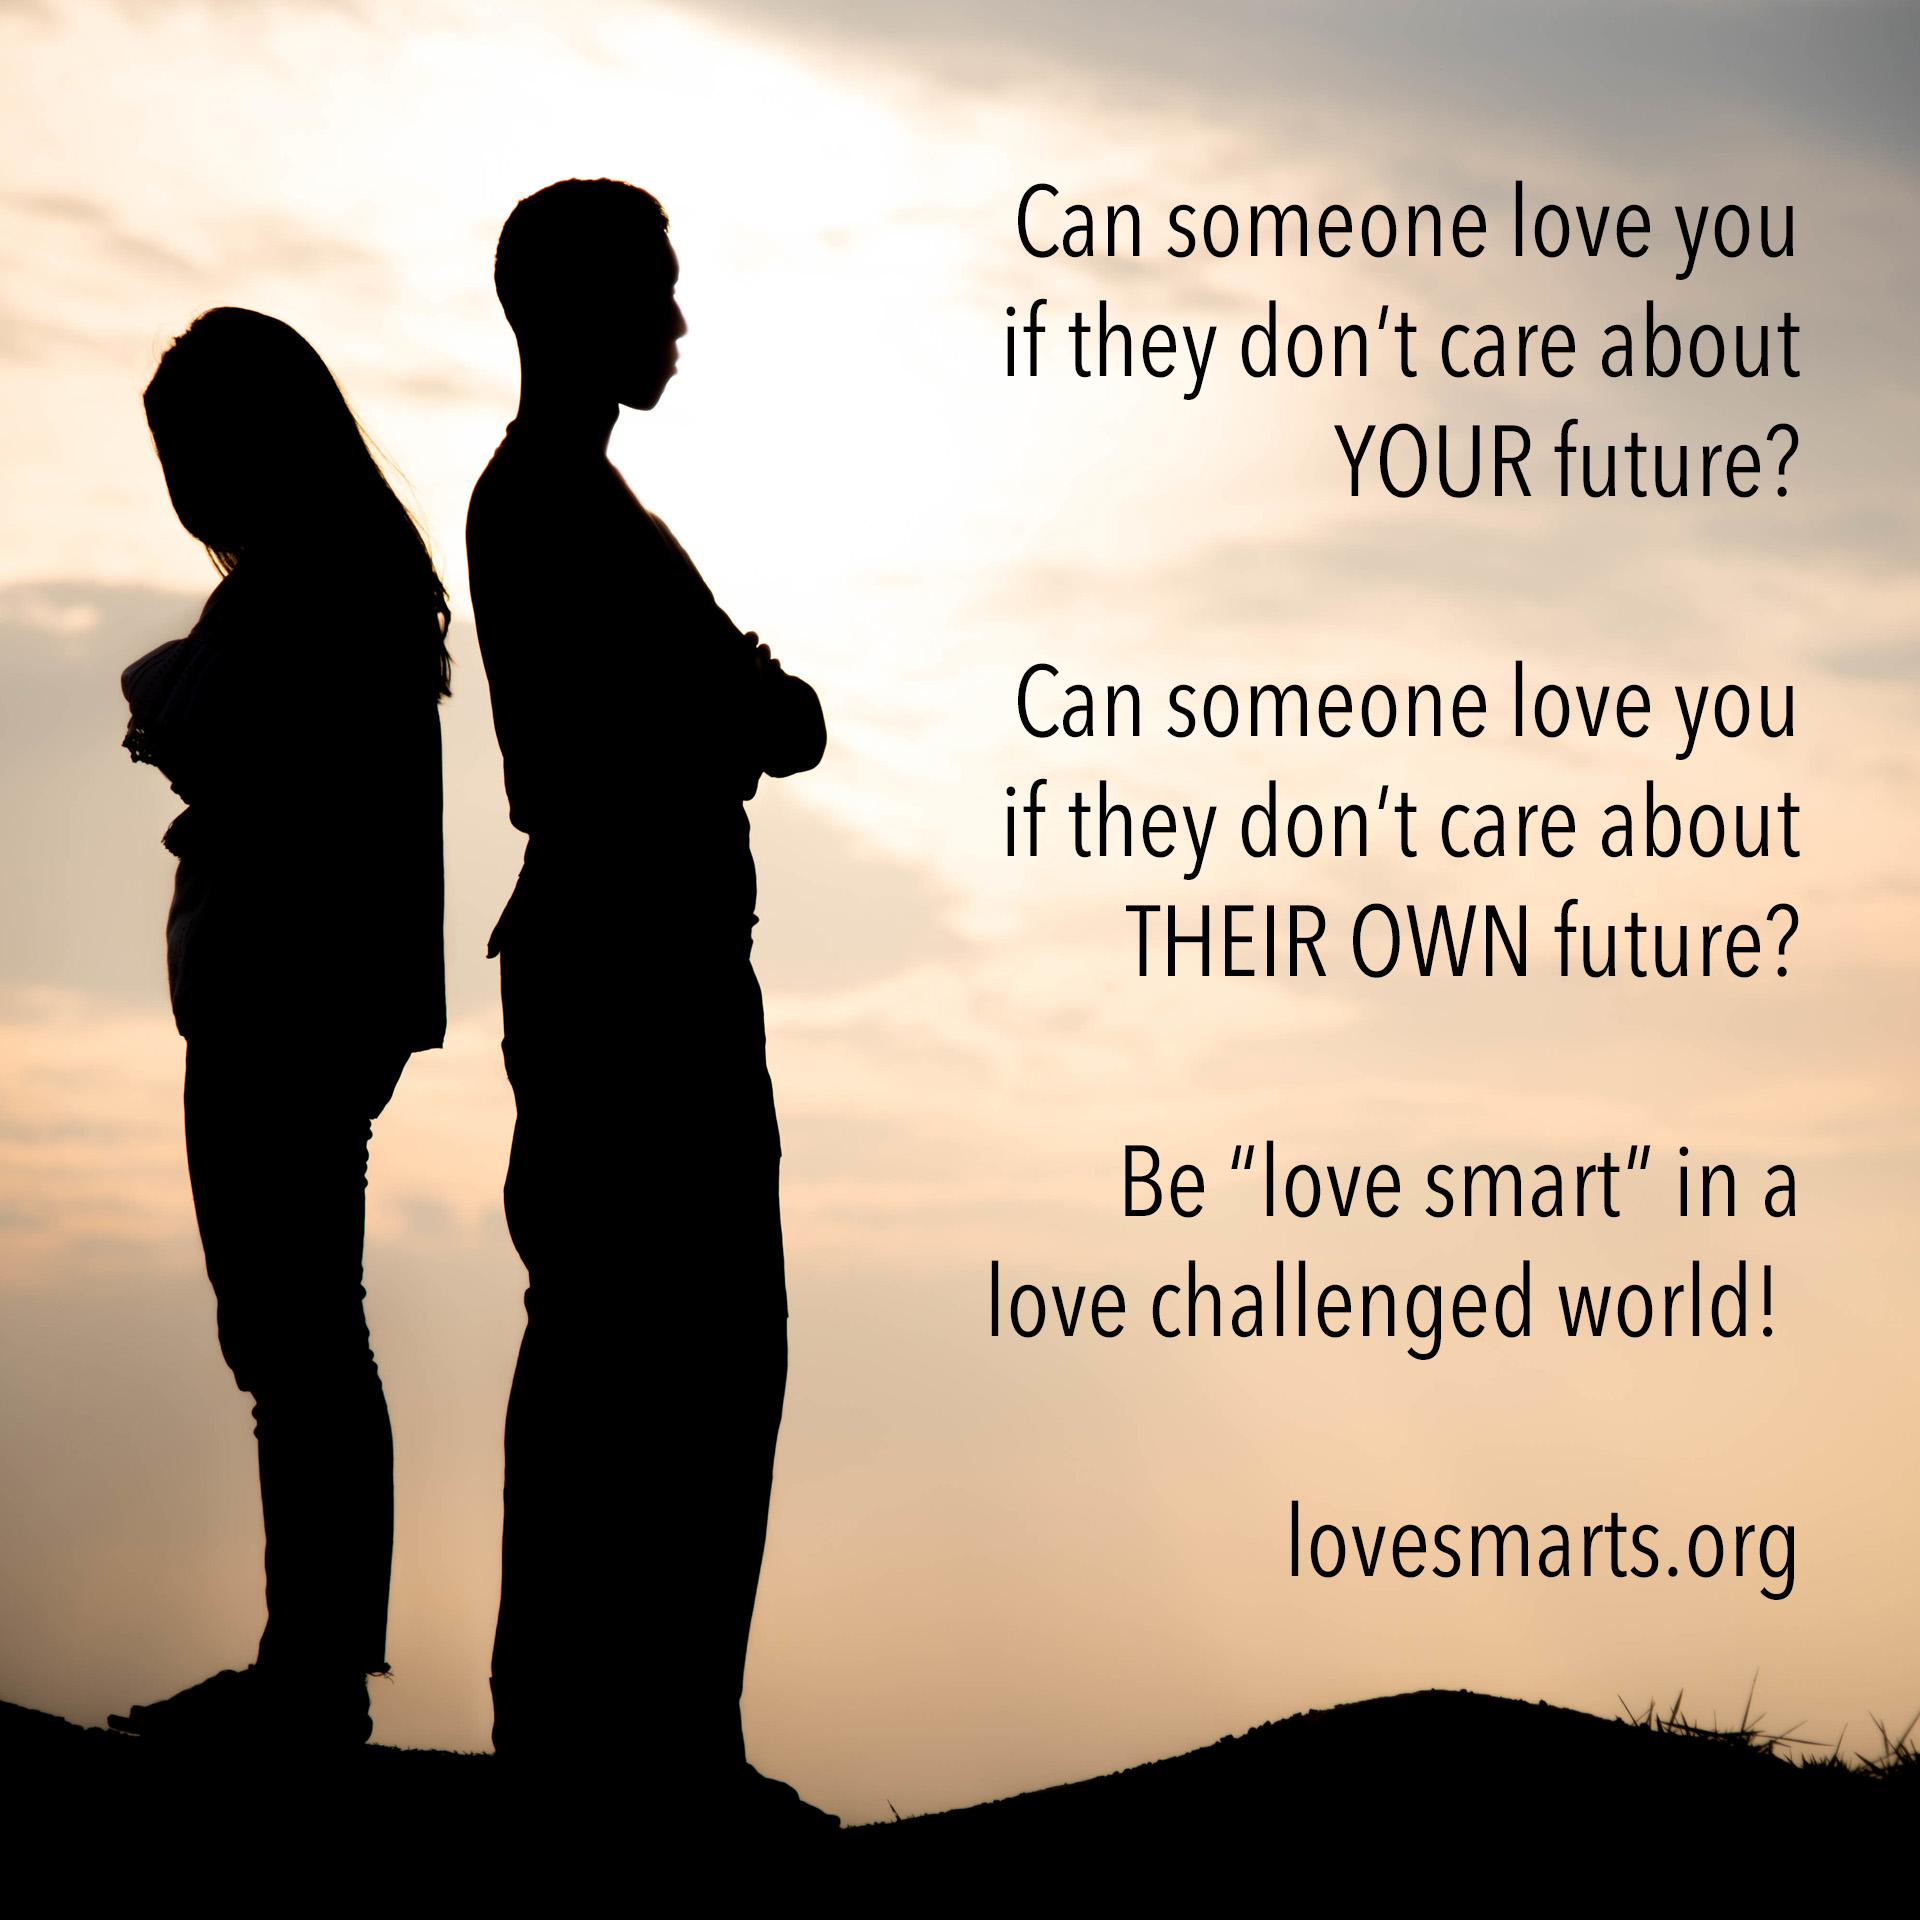 Can someone love you if they done care about your future? Can someone love you if they don't care about their own future? Be "love smart" in a love challenged world!